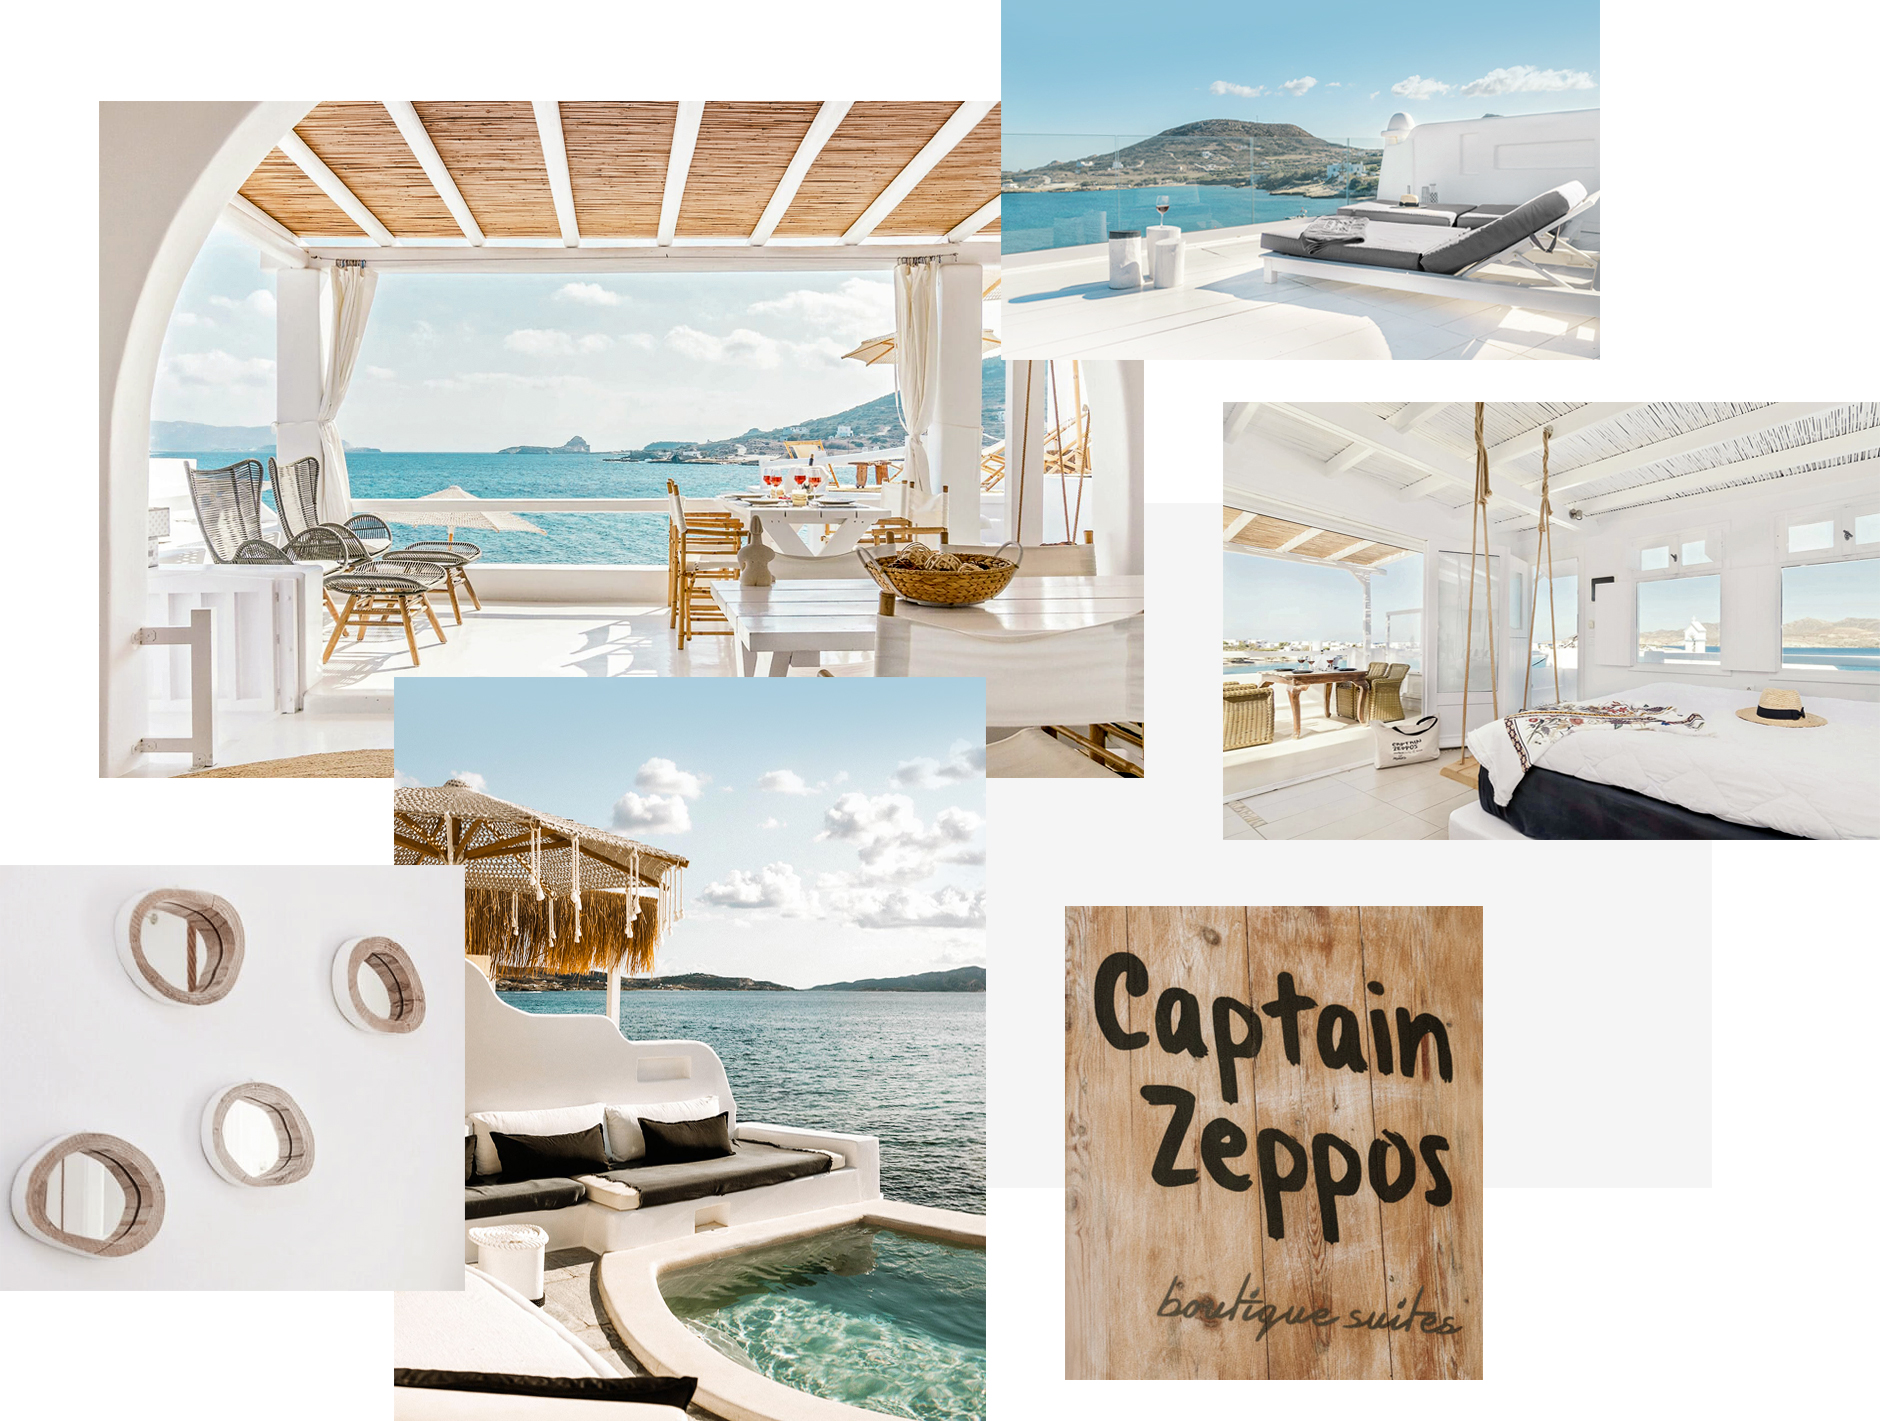 Captain Zeppos Boutique Suites, Milos, Greece. The ultimate guide to the best chic hotels in Milos, Greece by Travelplusstyle.com